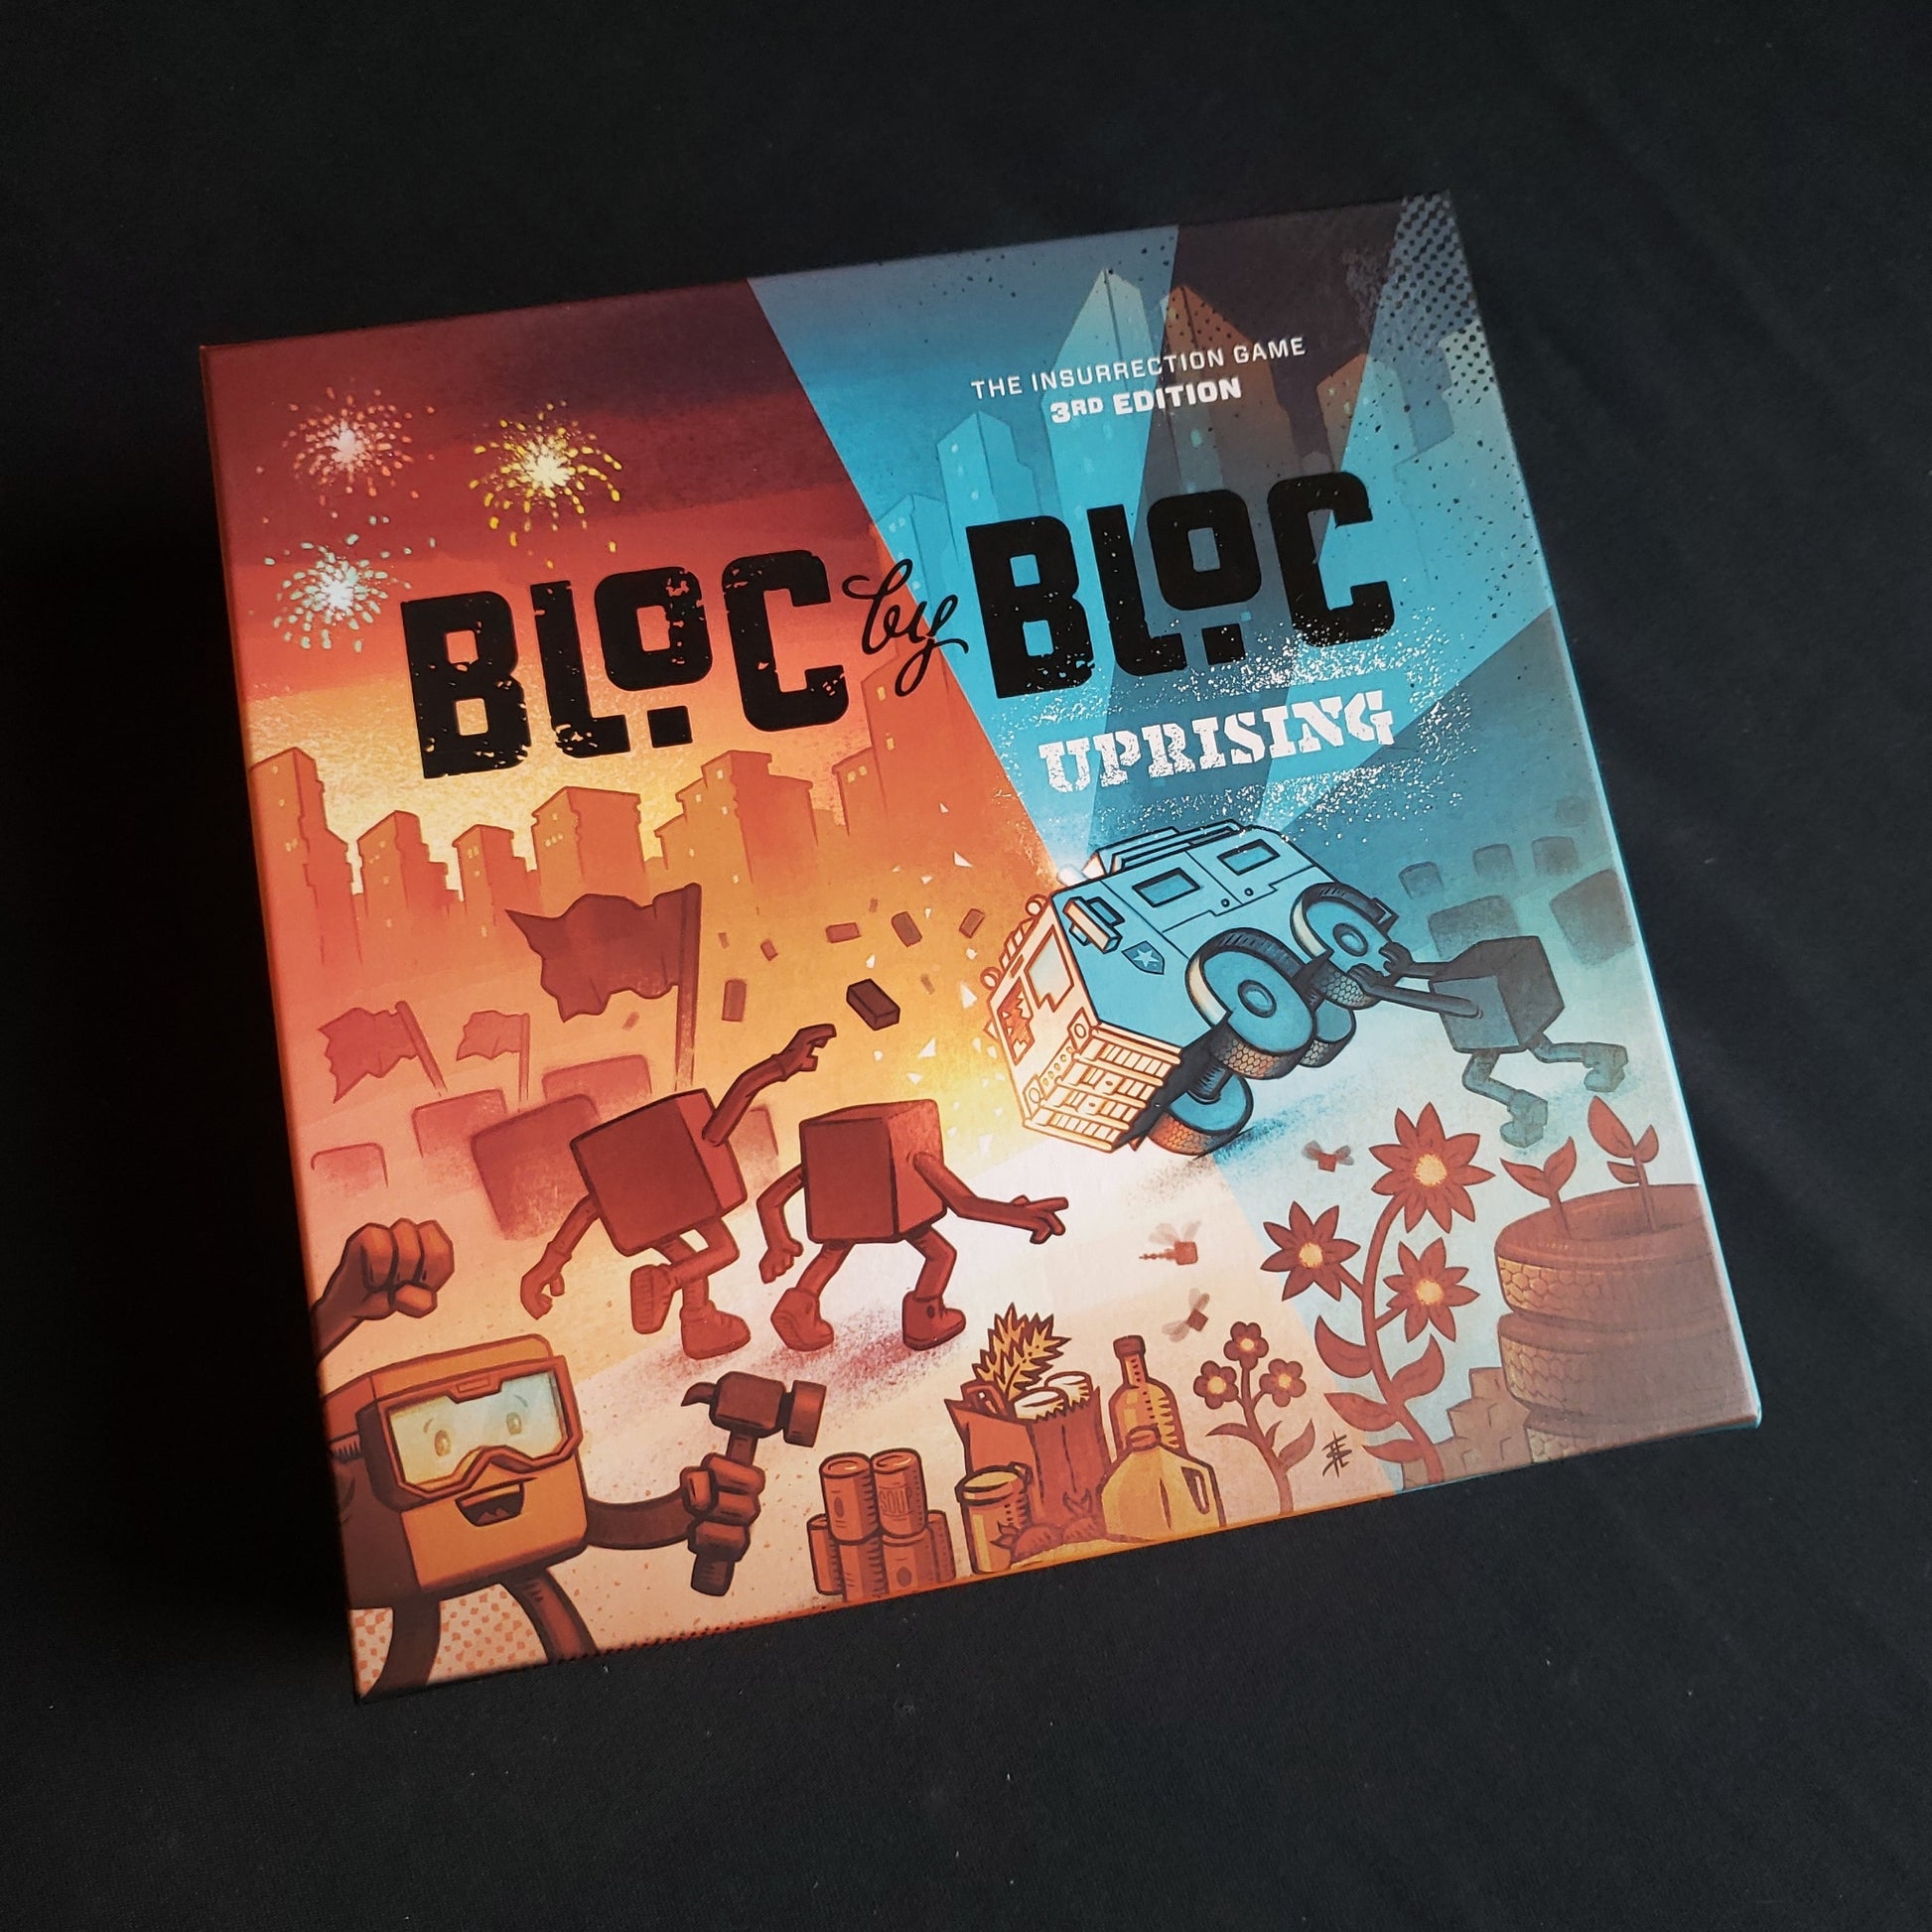 Image shows the front cover of the box of the Bloc by Bloc: Uprising board game